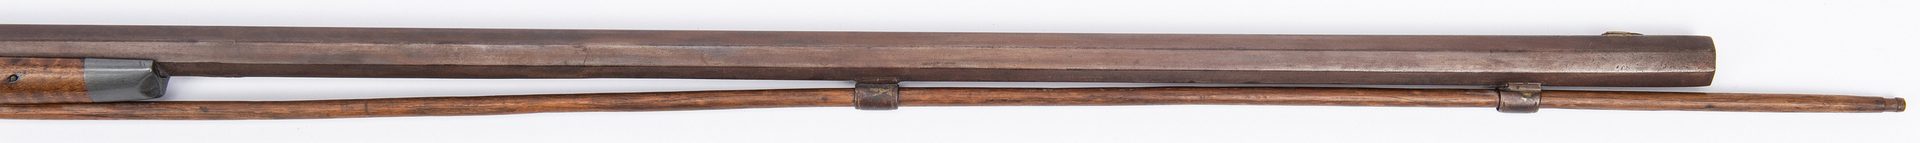 Lot 374: Percussion Long Rifle and Vicksburg Commission, 2 items